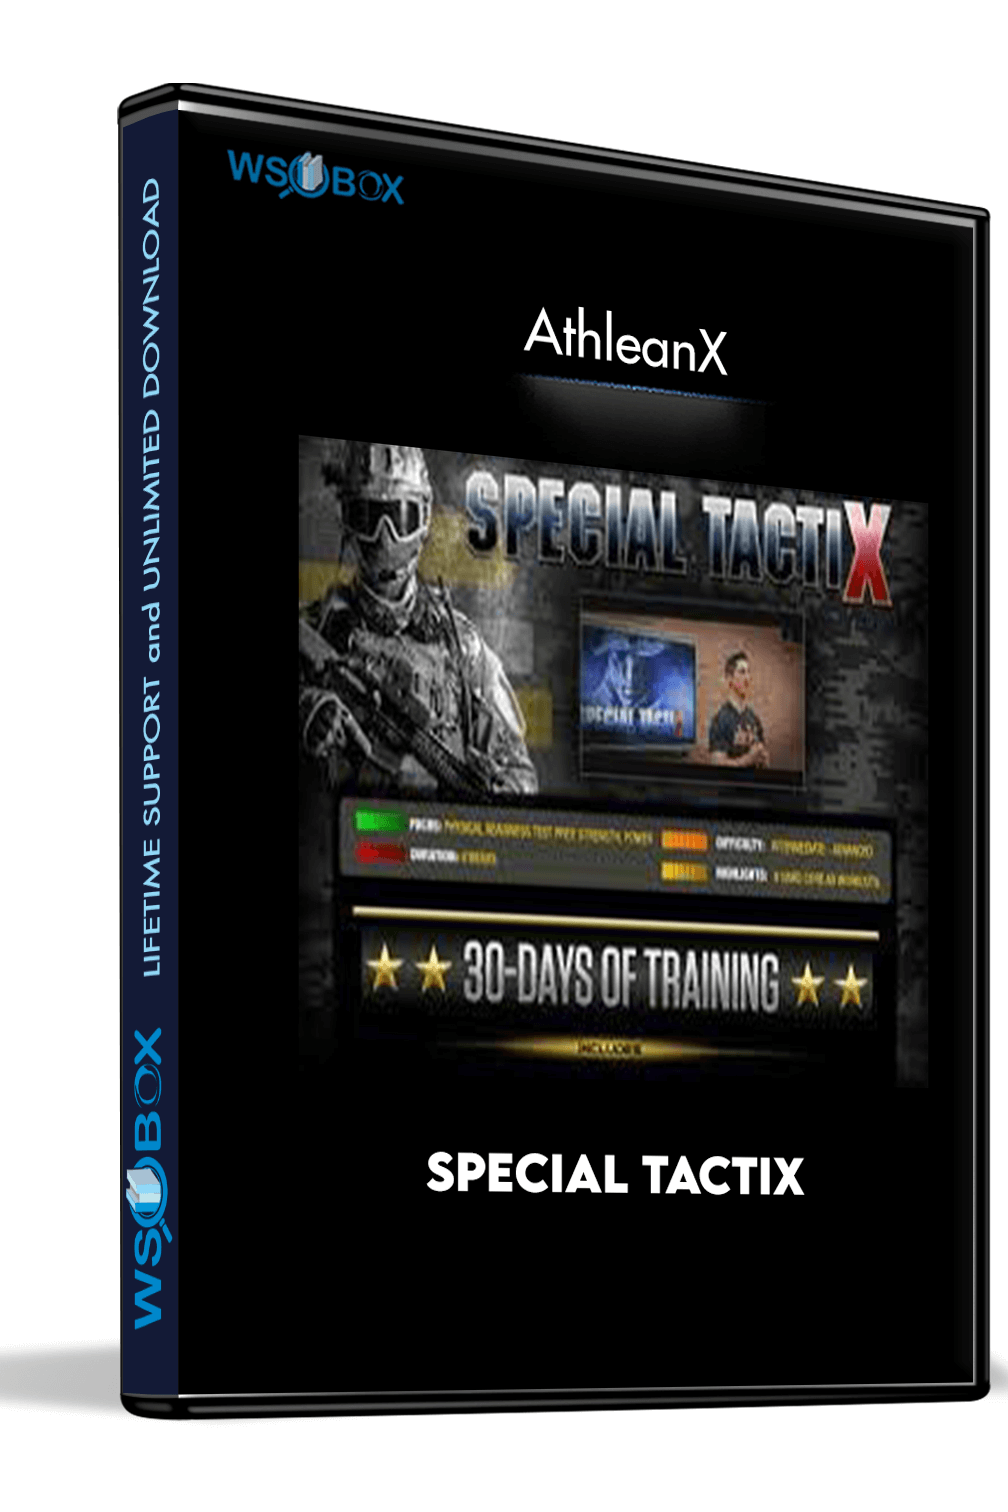 special-tactix-athleanx